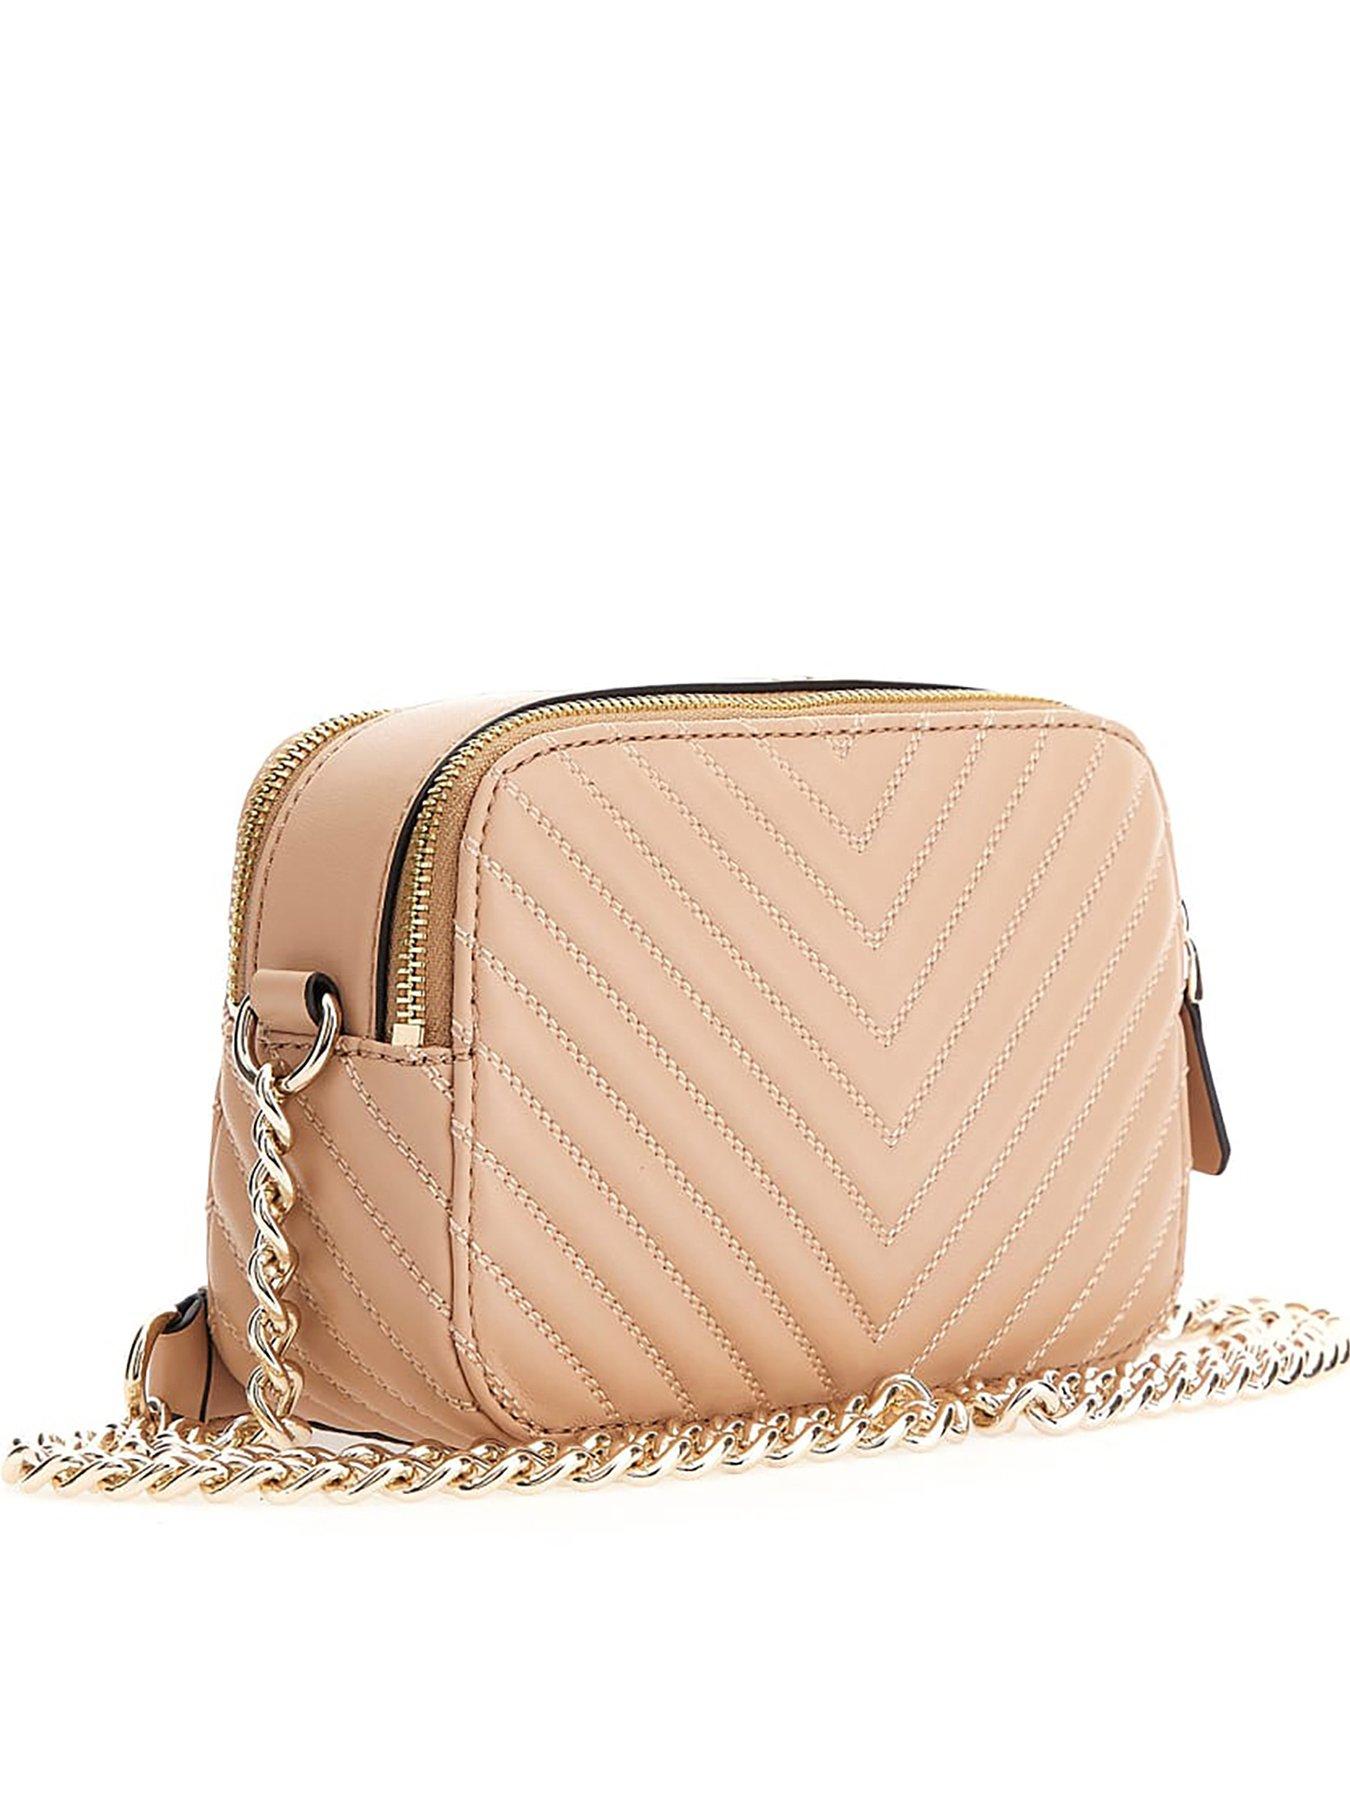 Guess Noelle Quilted Camera Bag - Beige | very.co.uk